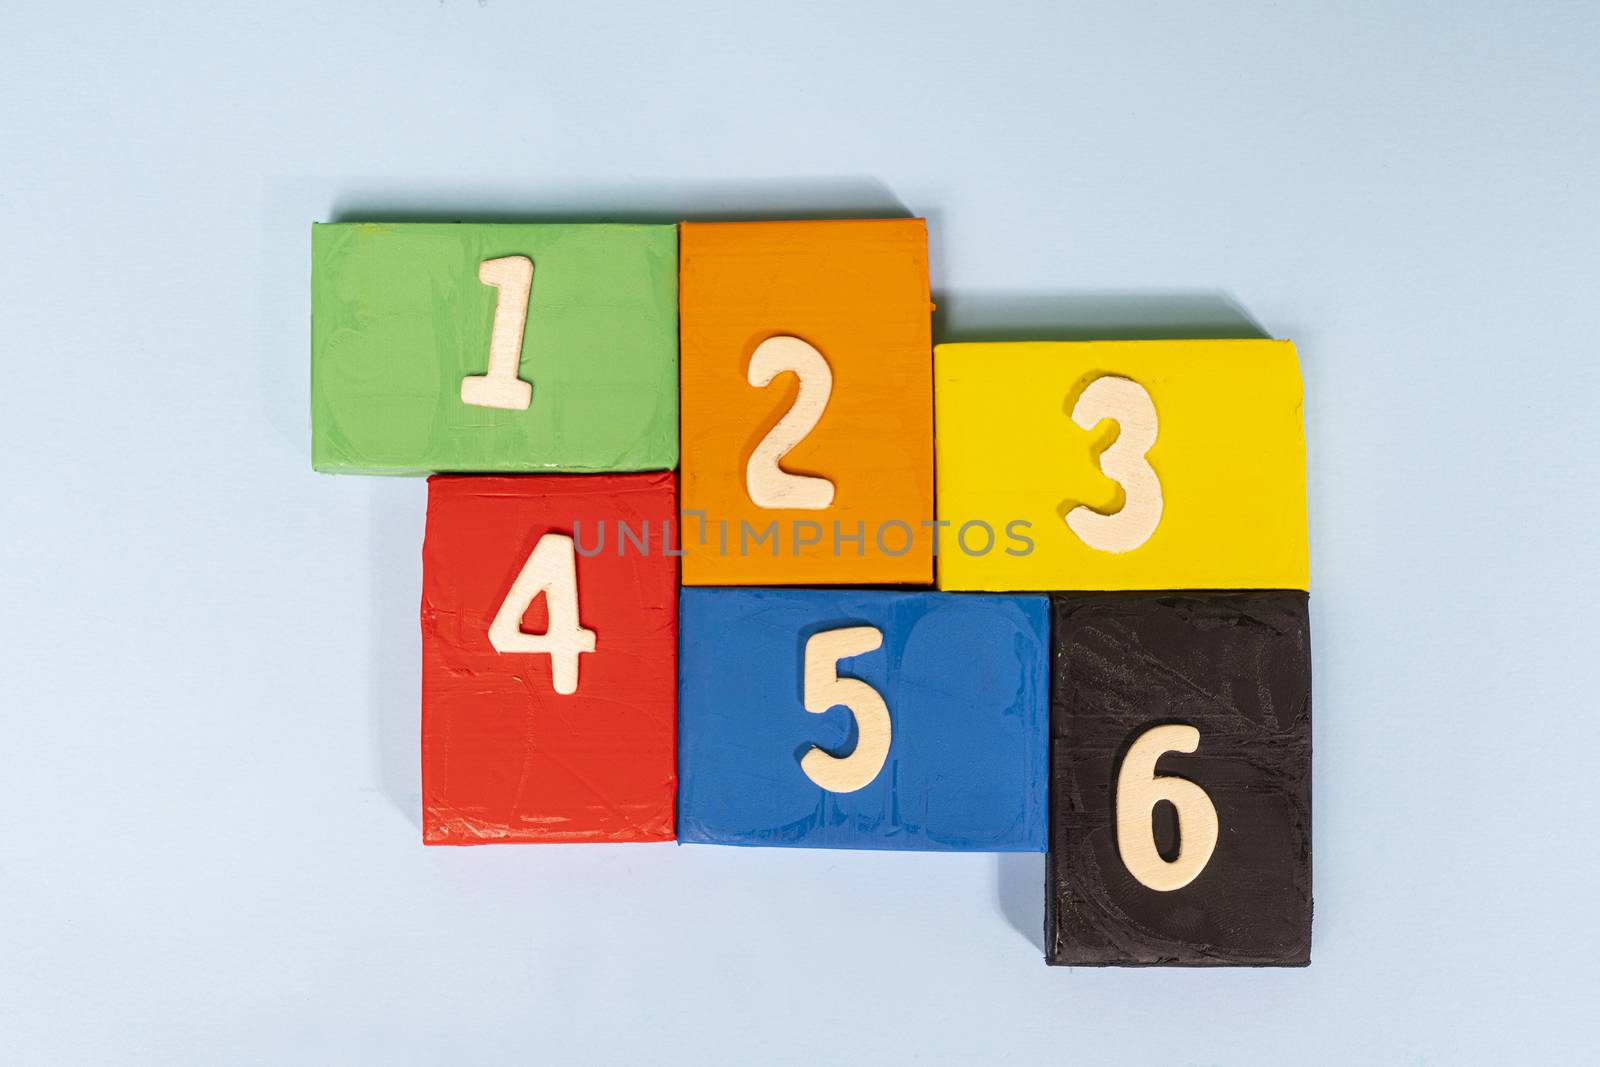 the numbers arranged on colored tiles